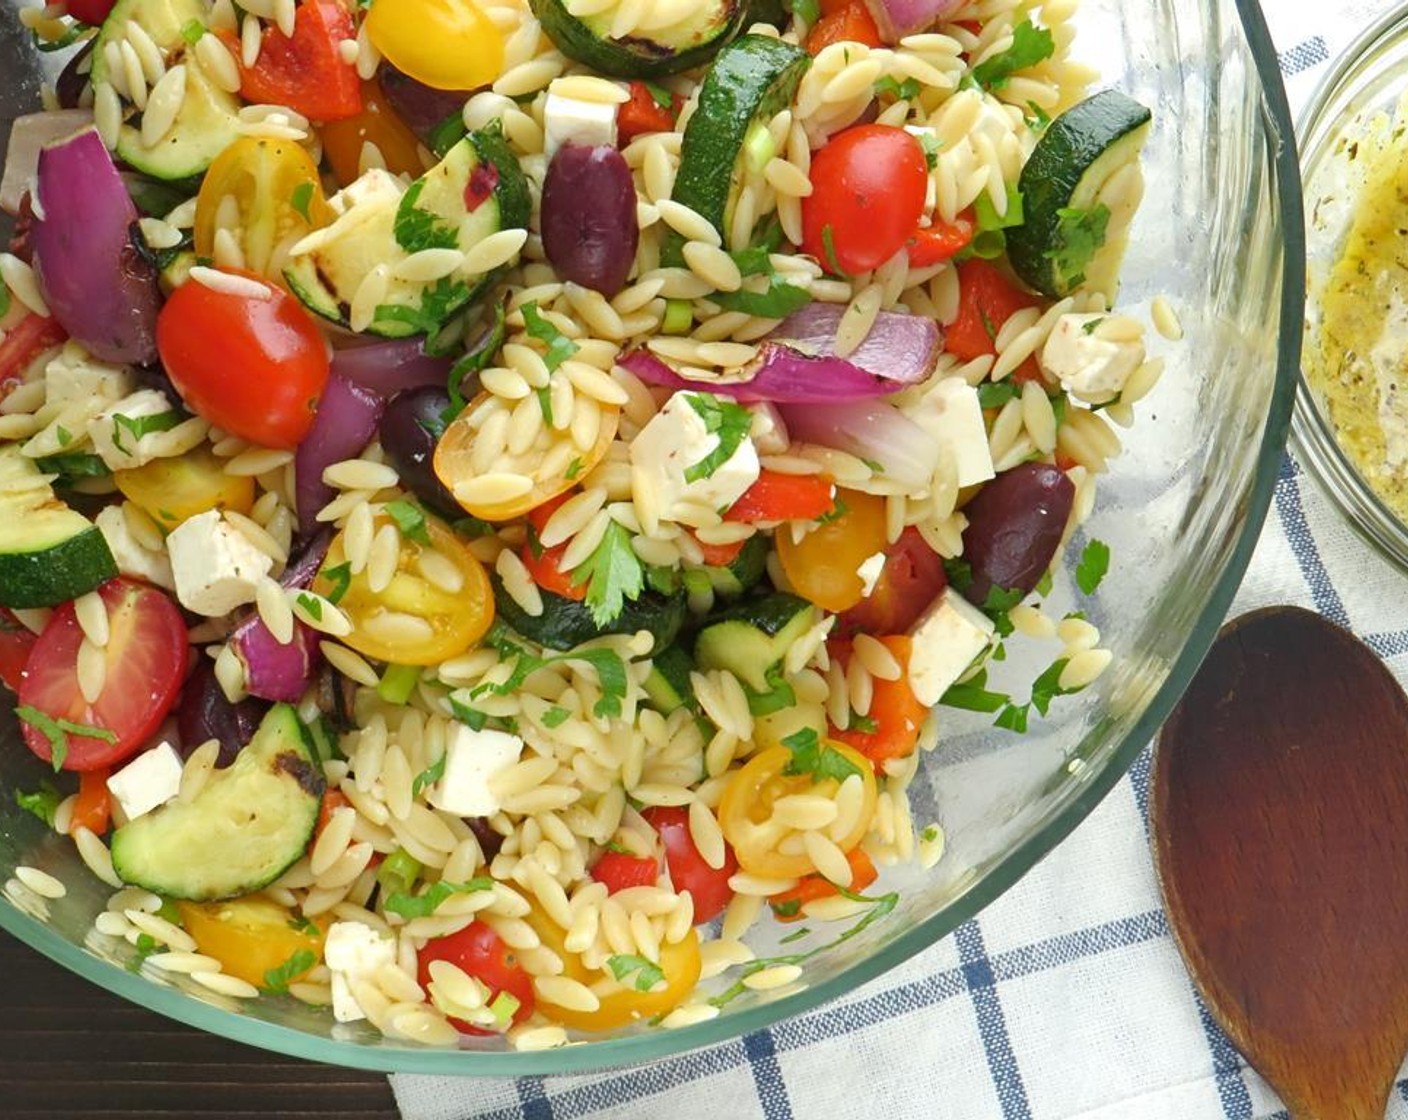 step 18 Stir together until dressing has emulsified. Add dressing to the orzo salad and toss to coat.